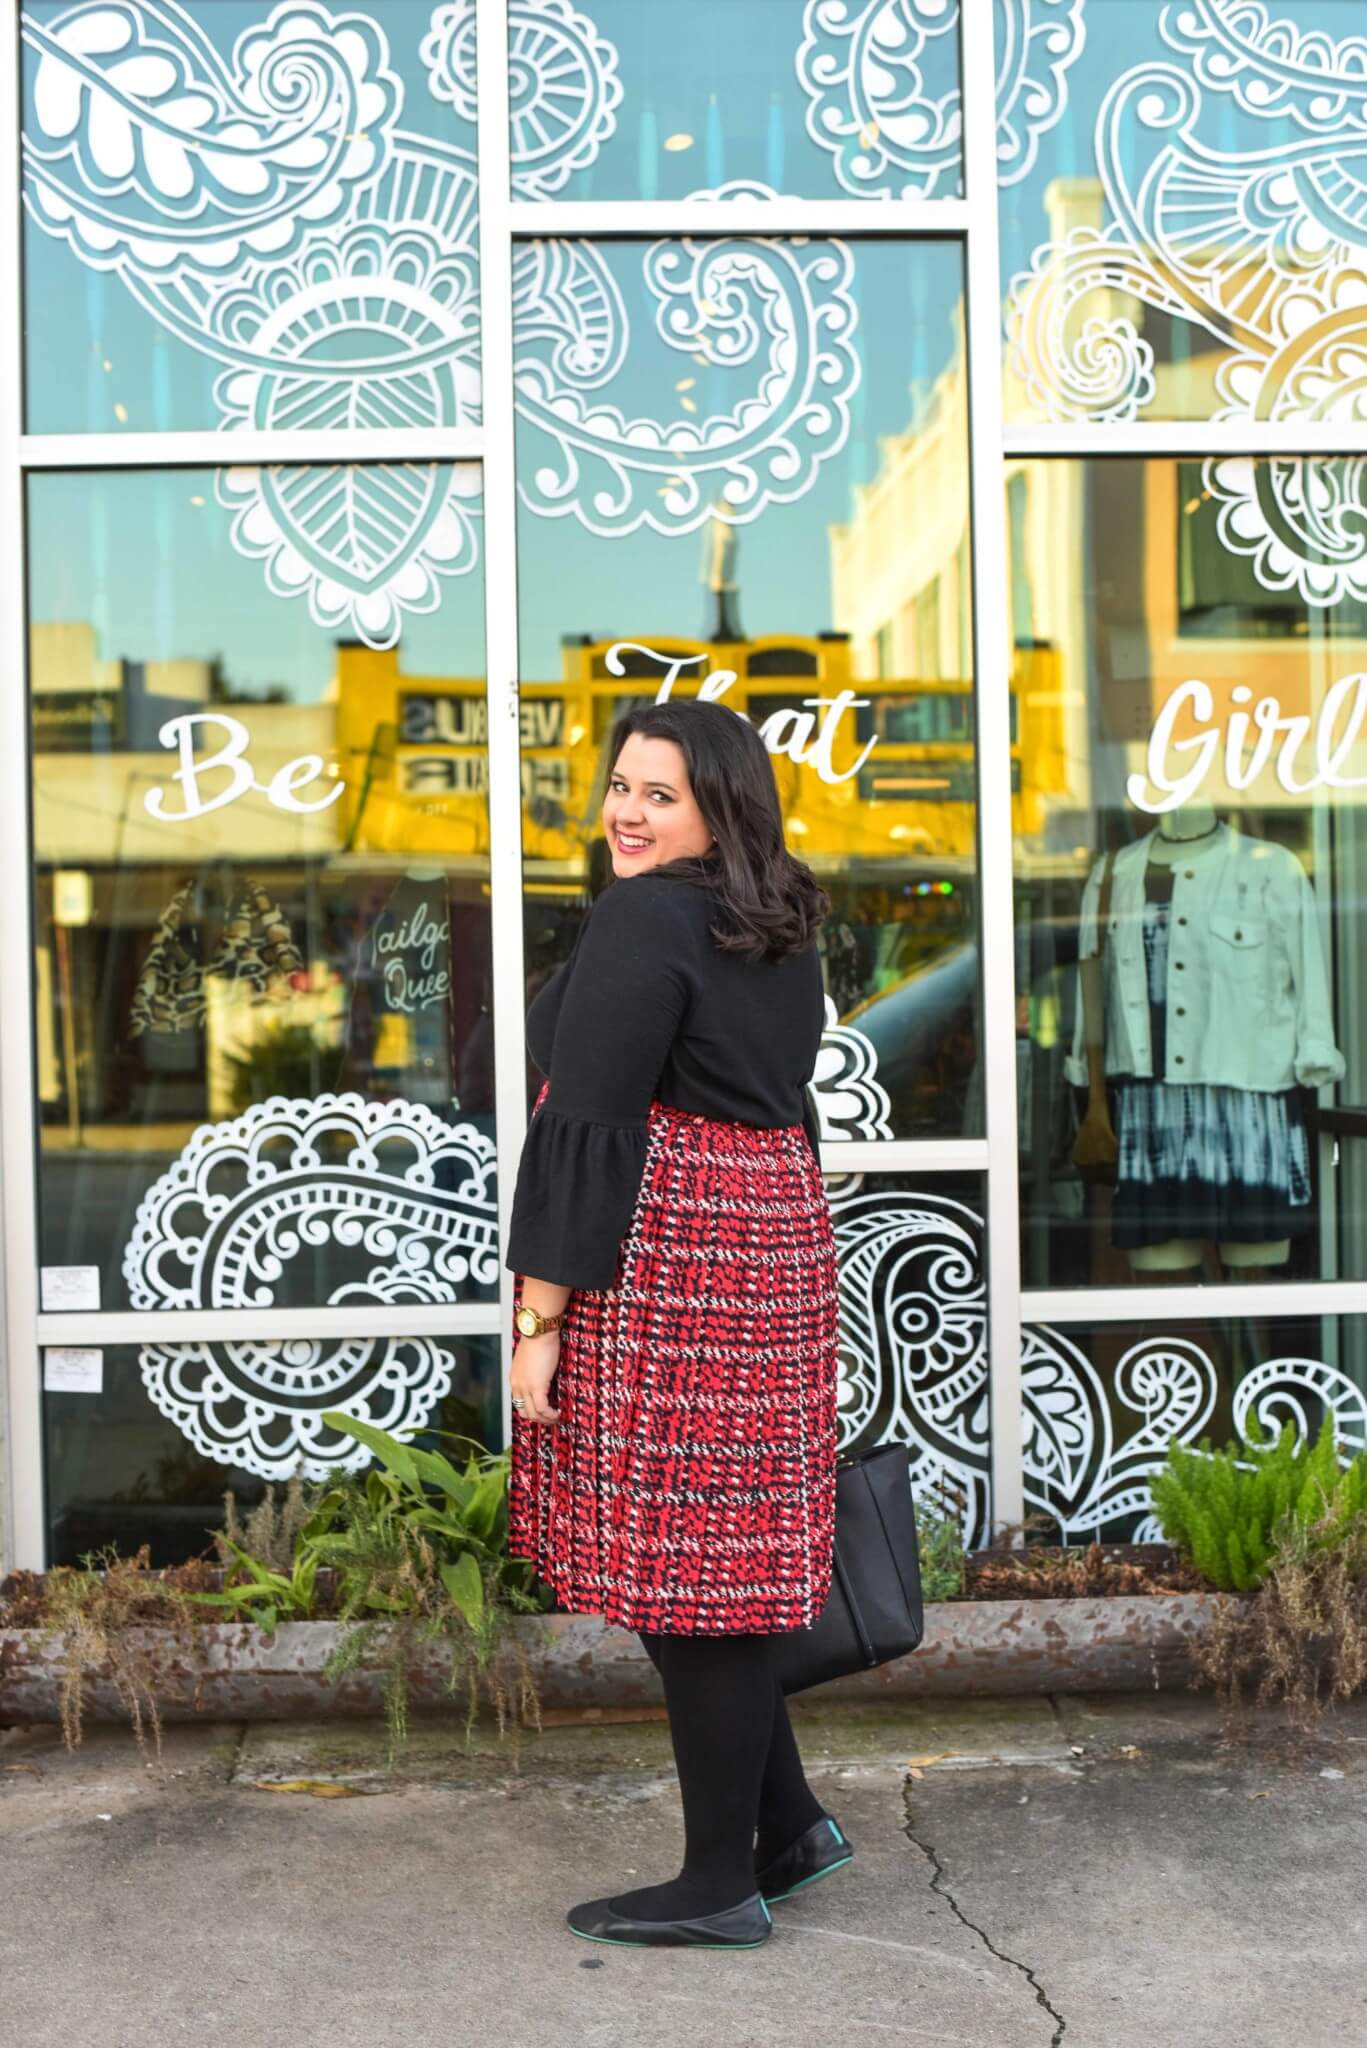 Dressing for all of the holiday season functions can be difficult epecially when you work long hours. Emily Bastedo from the curvy style blog Something Gold, Something Blue, is sharing her solution by styling a red plaid skirt and unique black sweater from Eloquii paired with gorgeous and comfortable Just My Size tights and Tieks.